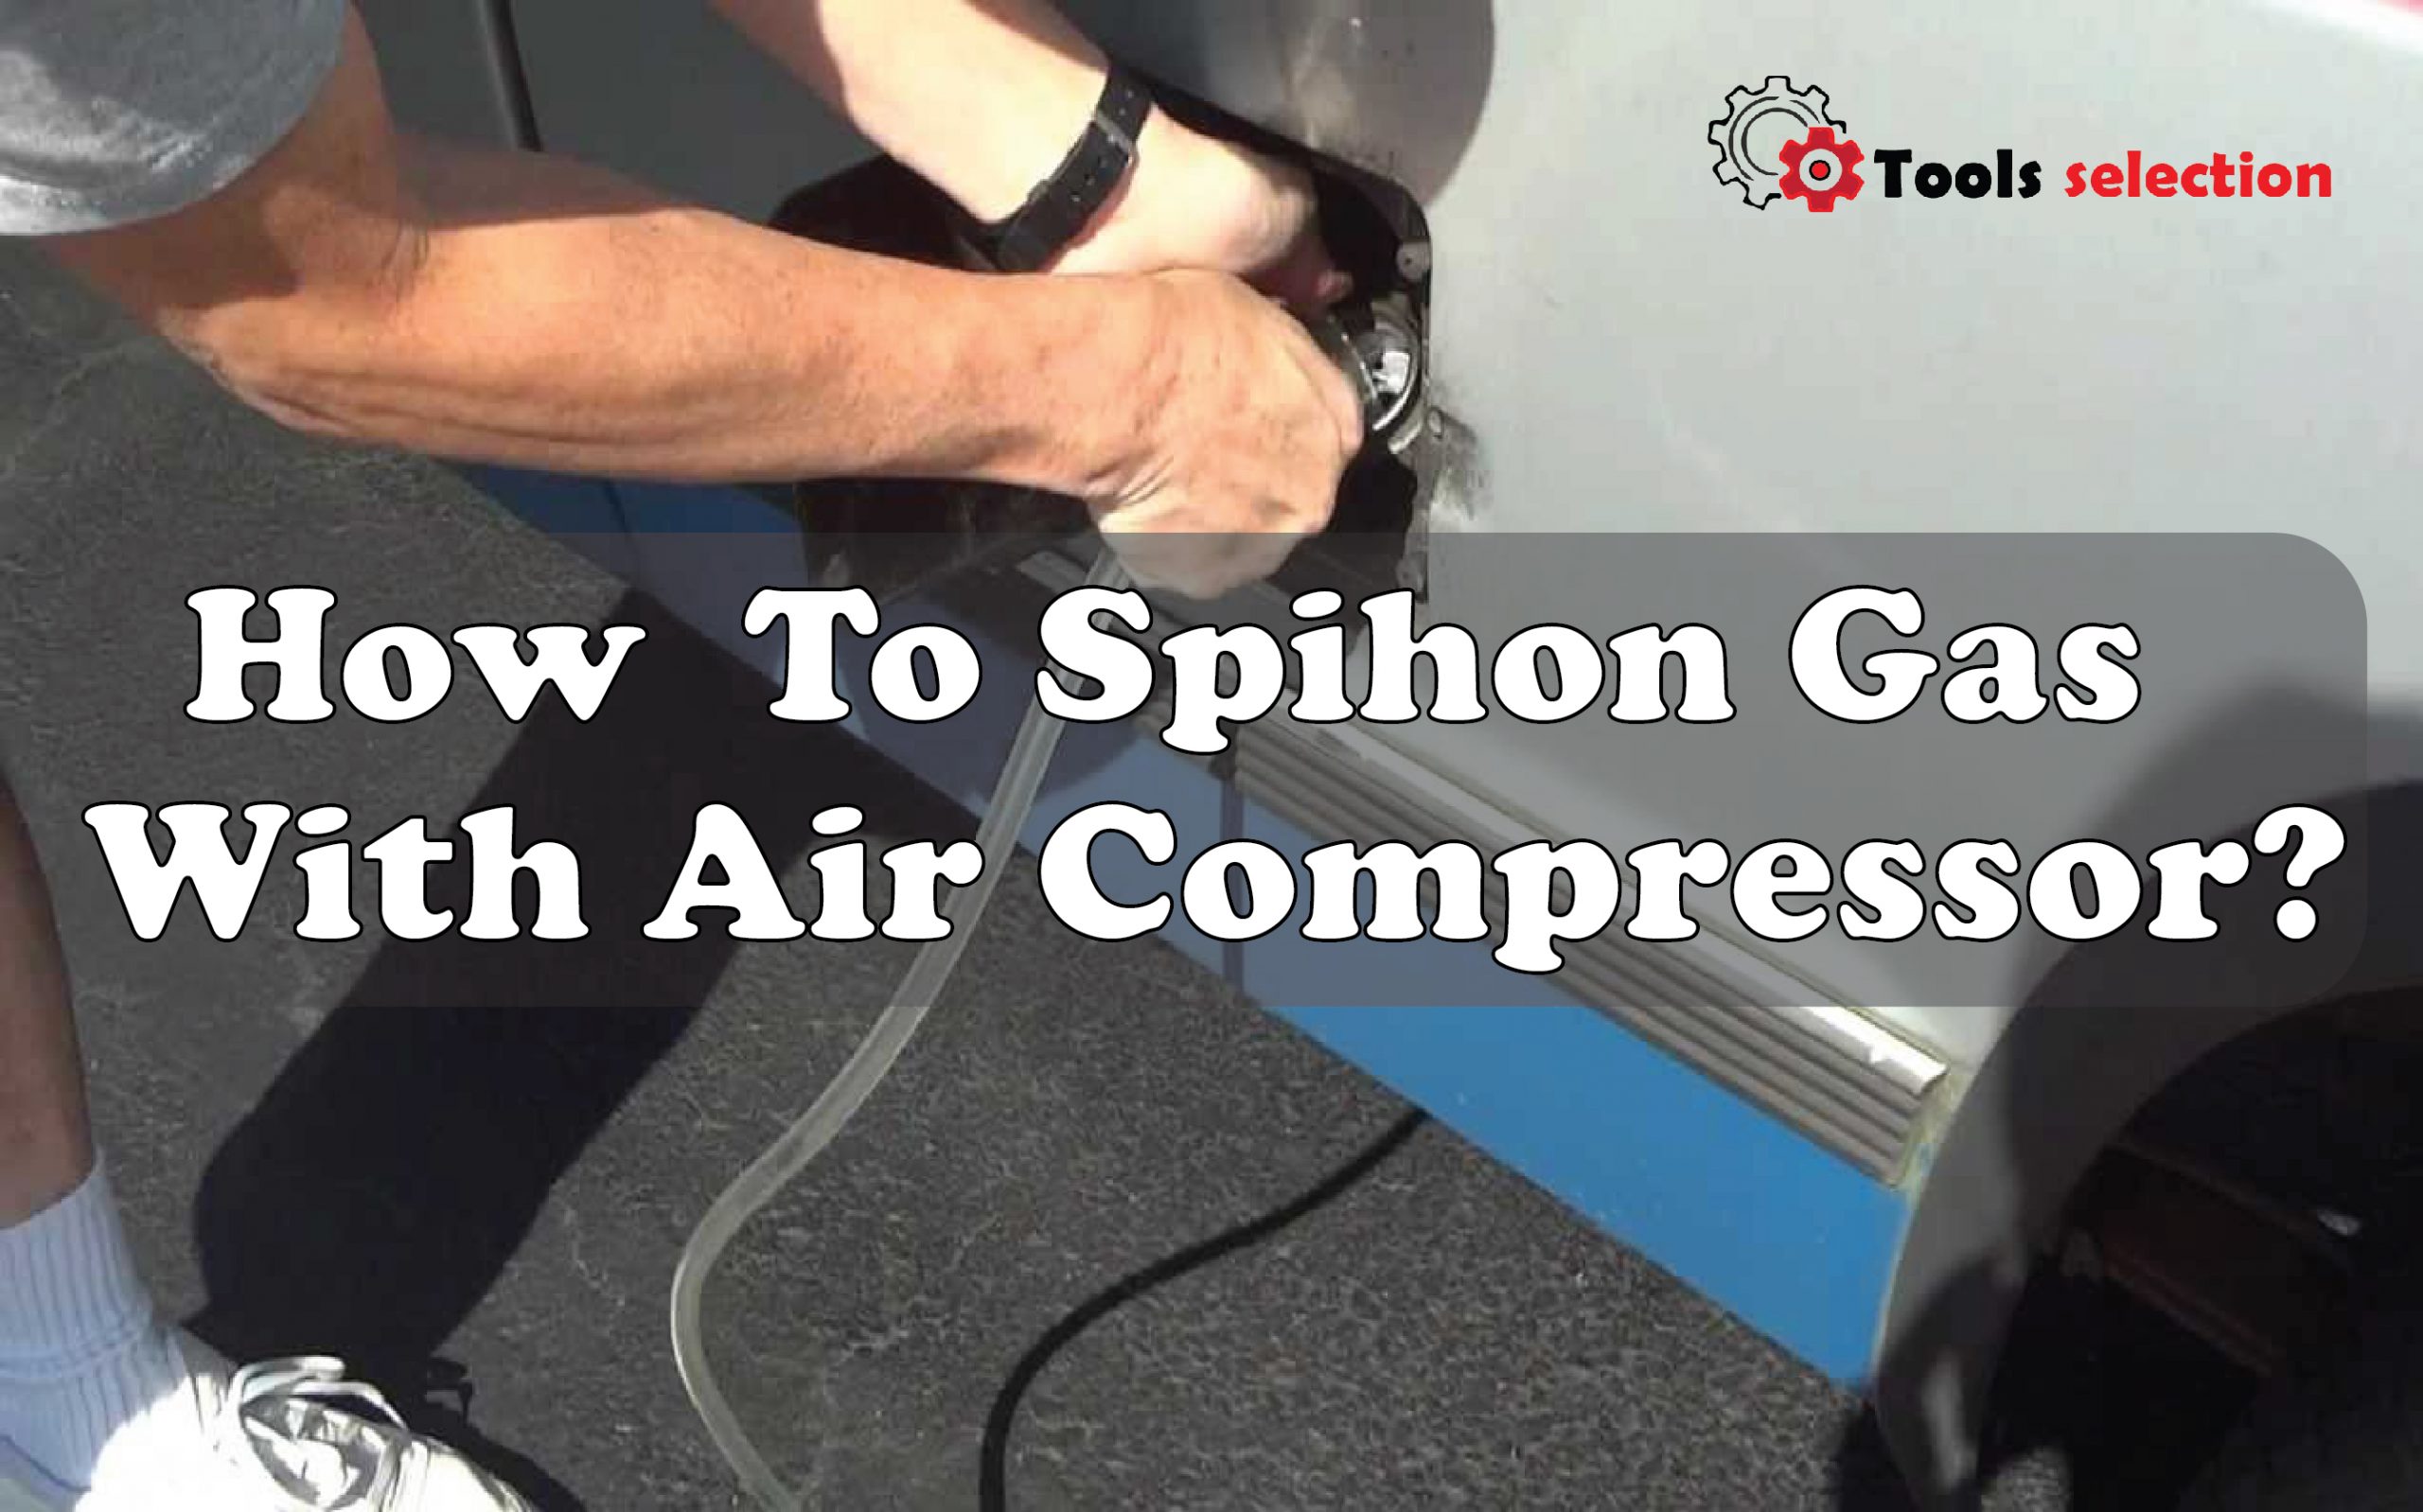 How To Siphon Gas With Air Compressor?: Know Now!